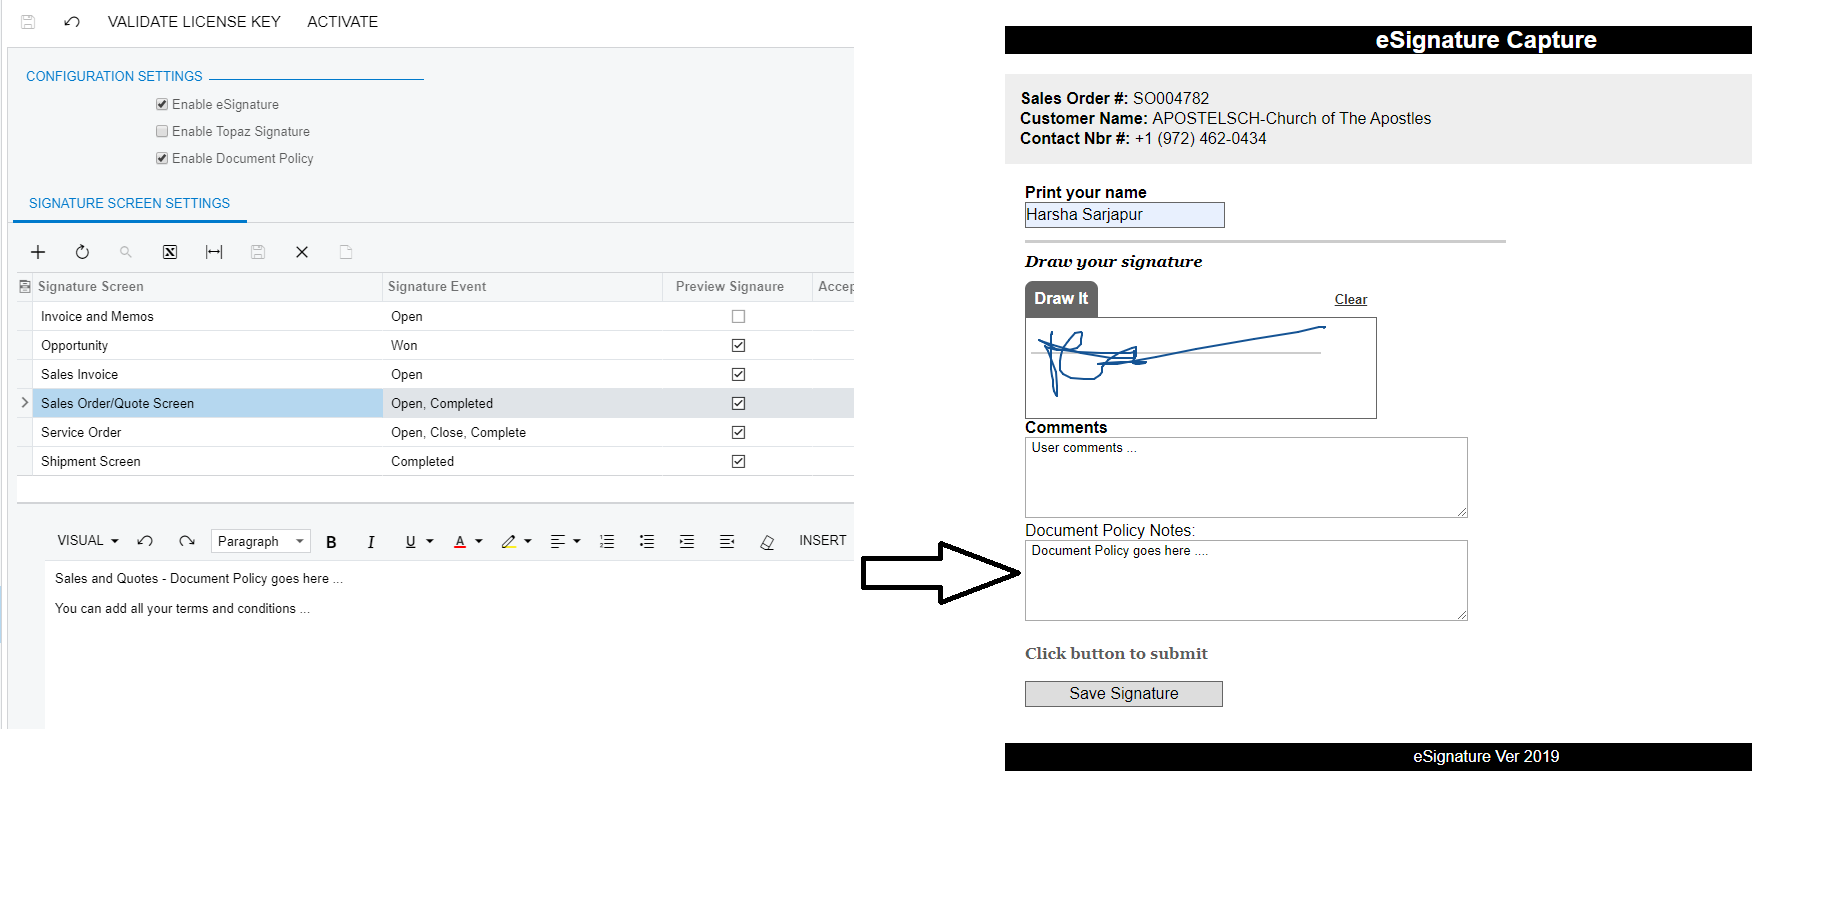 Signature capture On Sales Order screen With Document Policy